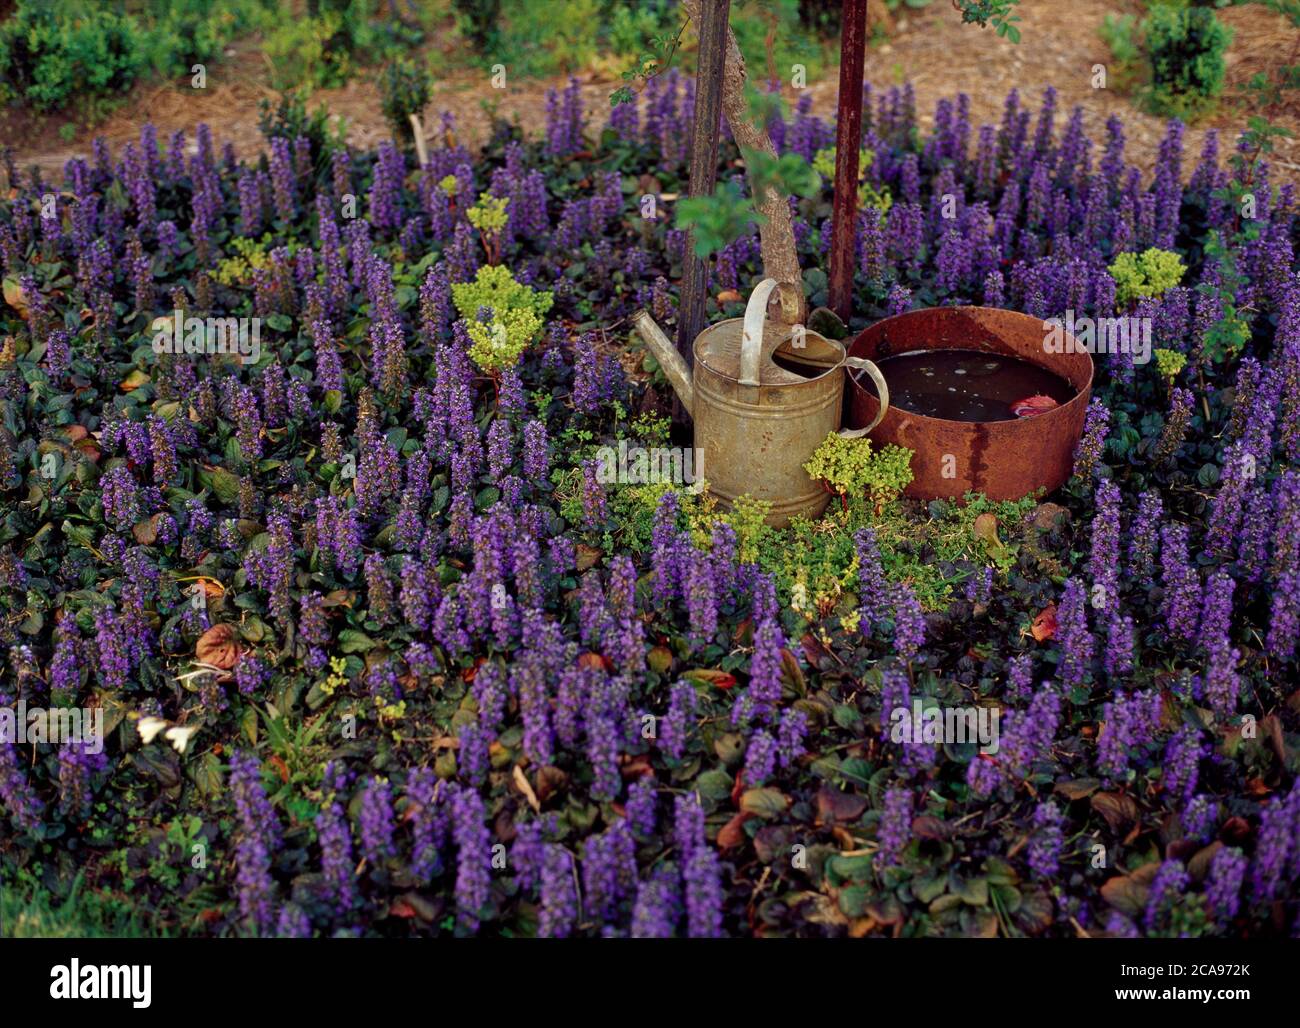 A patch of Ajuga flowers with vintage watering can and rustic iron tub Stock Photo